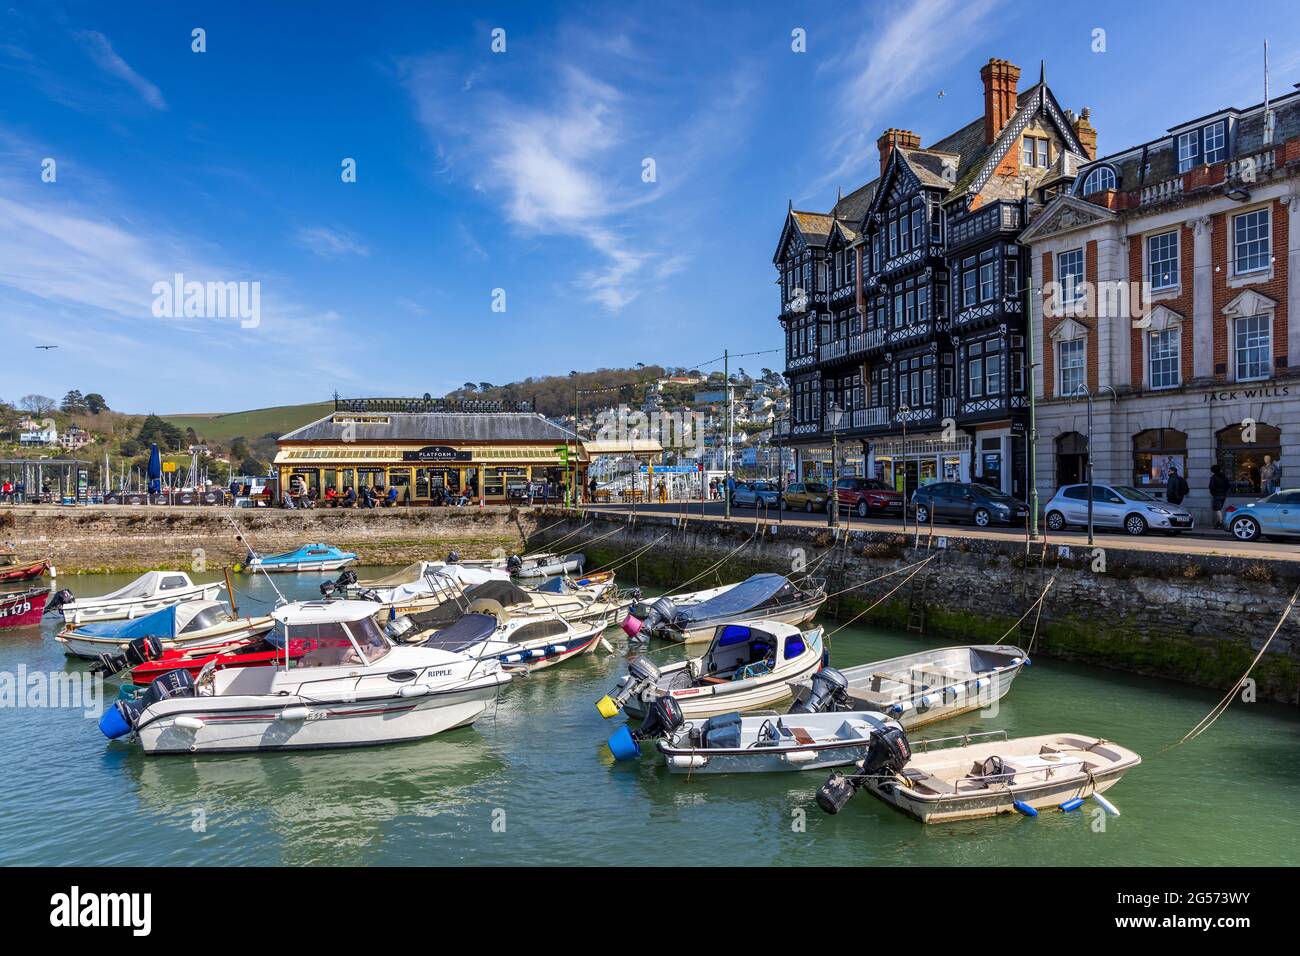 Boats moored in the lovely little square inner harbour at Dartmouth in South Devon, England. Stock Photo